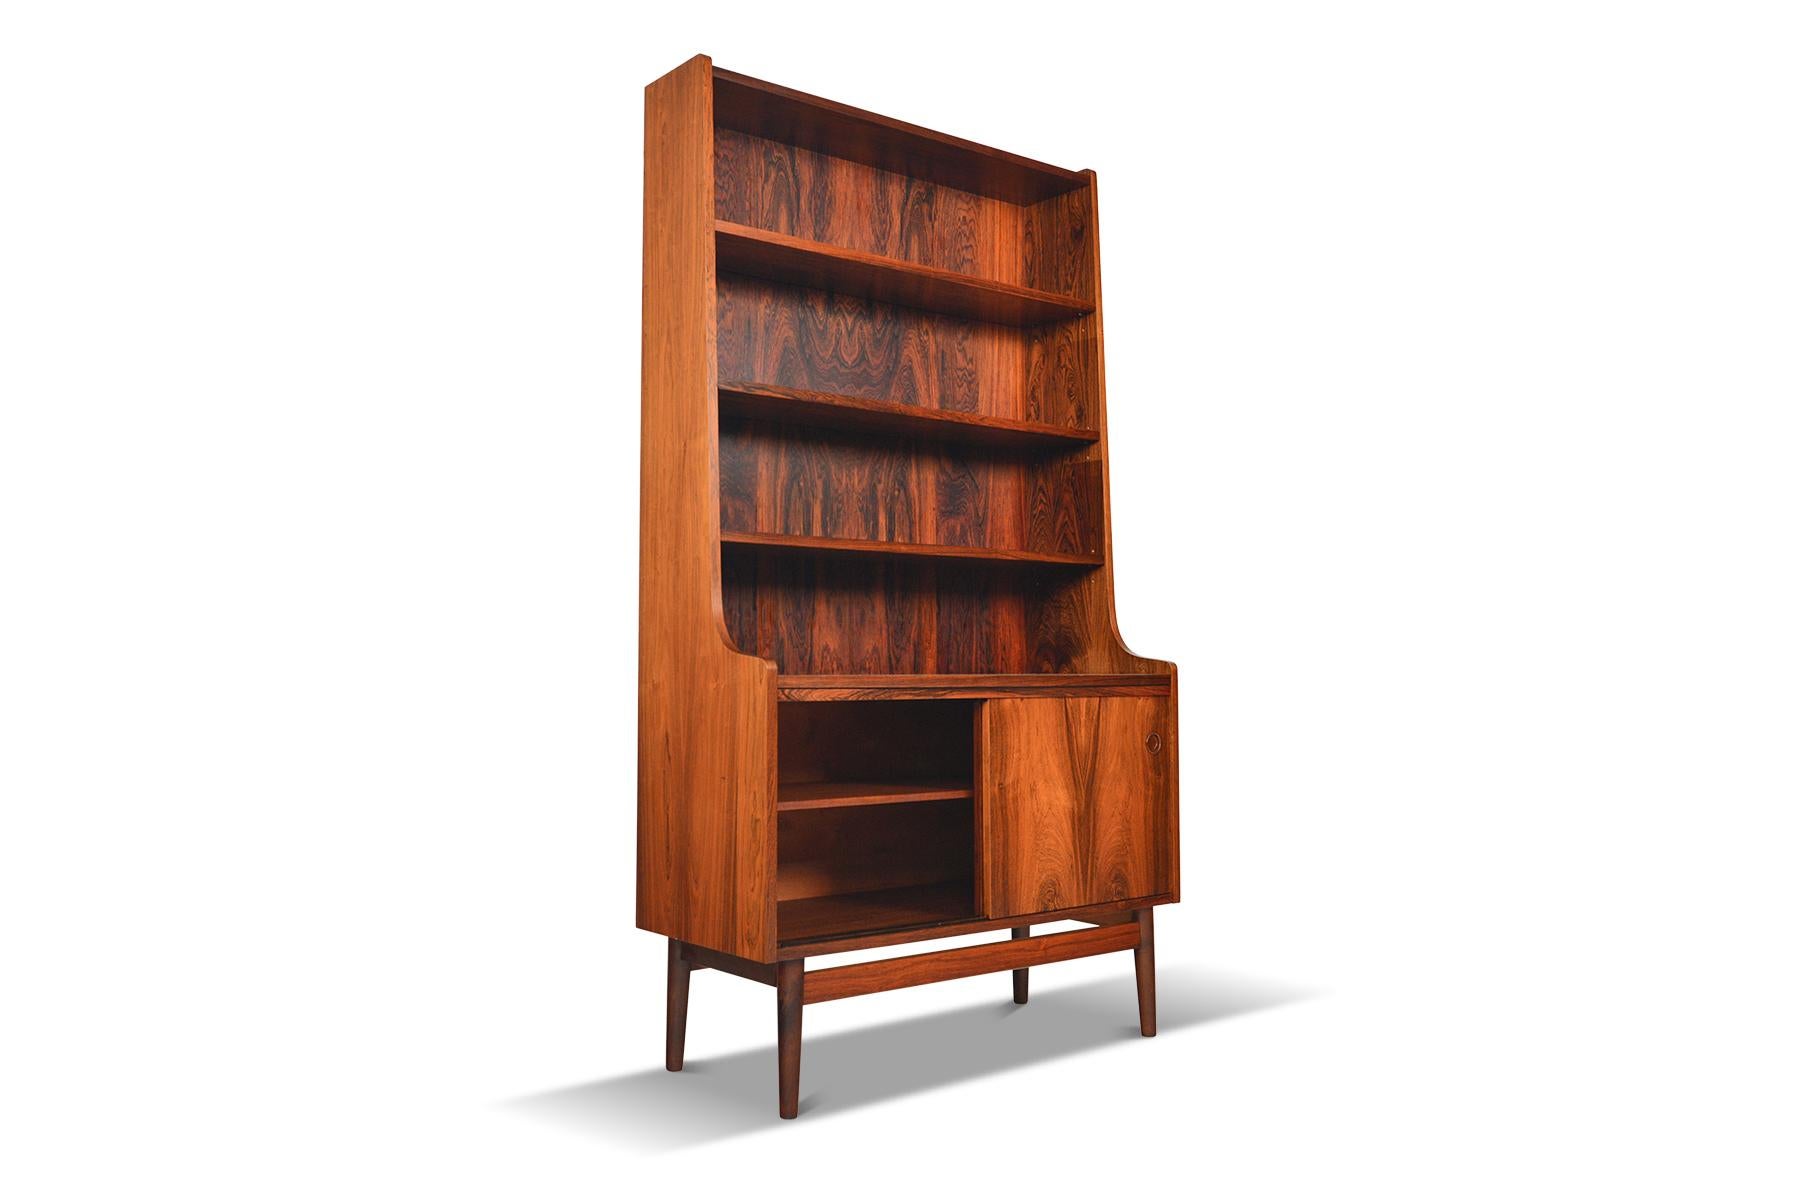 Danish Johannes Sorth Rosewood Bookcase #1 For Sale